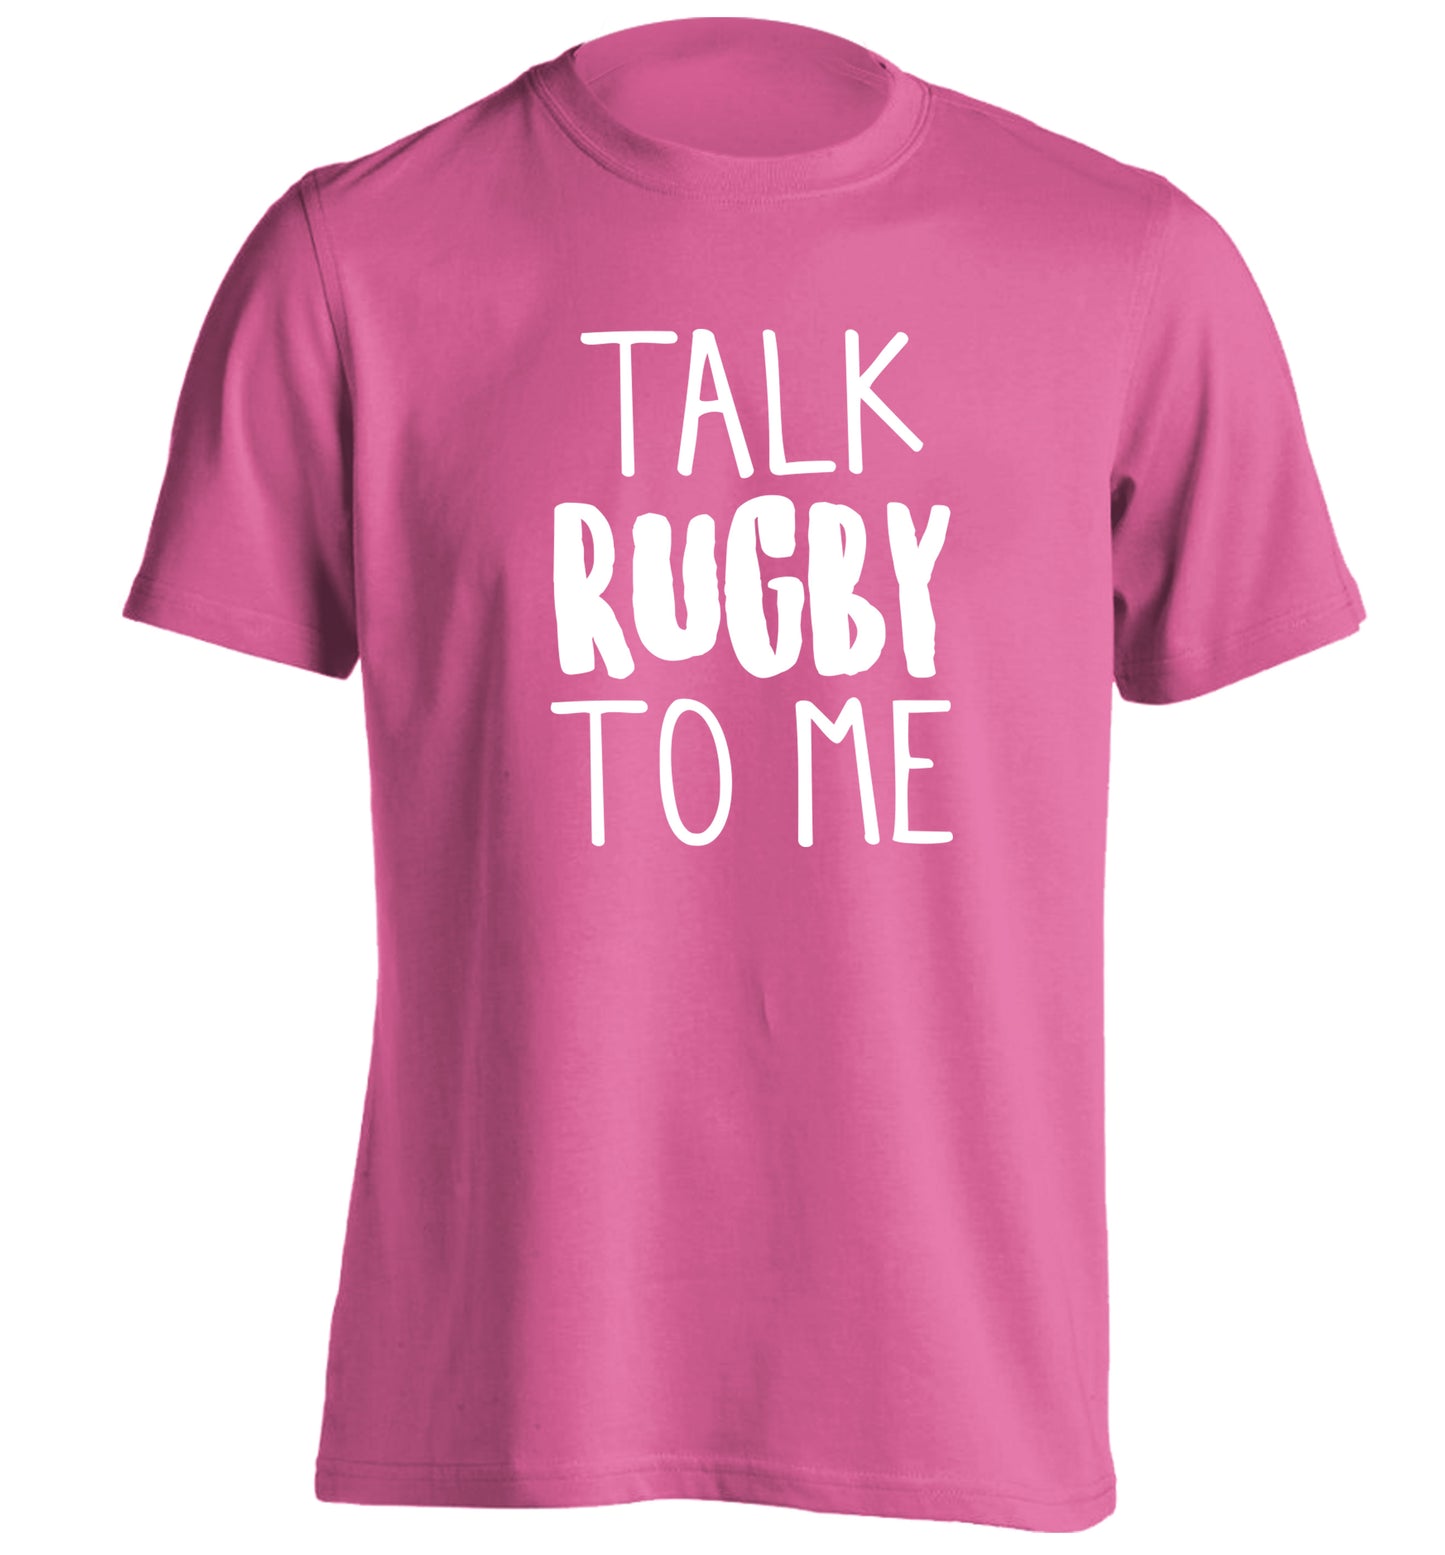 Talk rugby to me adults unisex pink Tshirt 2XL